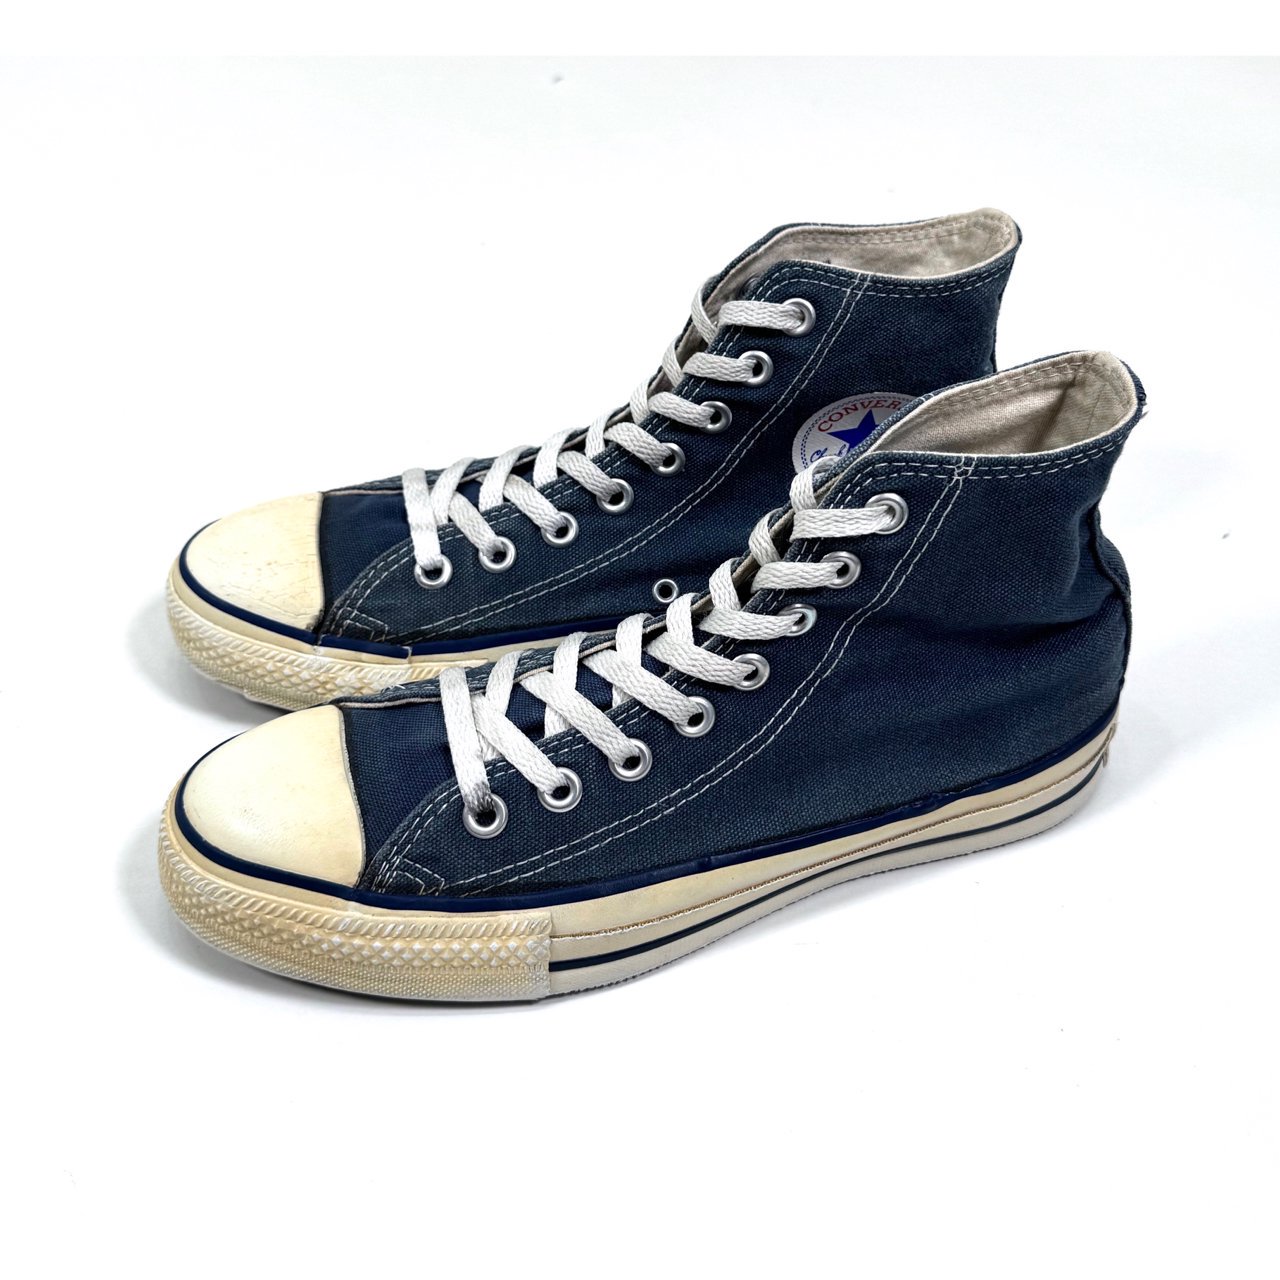 1990s CONVERSE ALL STAR HI US6.5(25cm) MADE IN USA Navy
